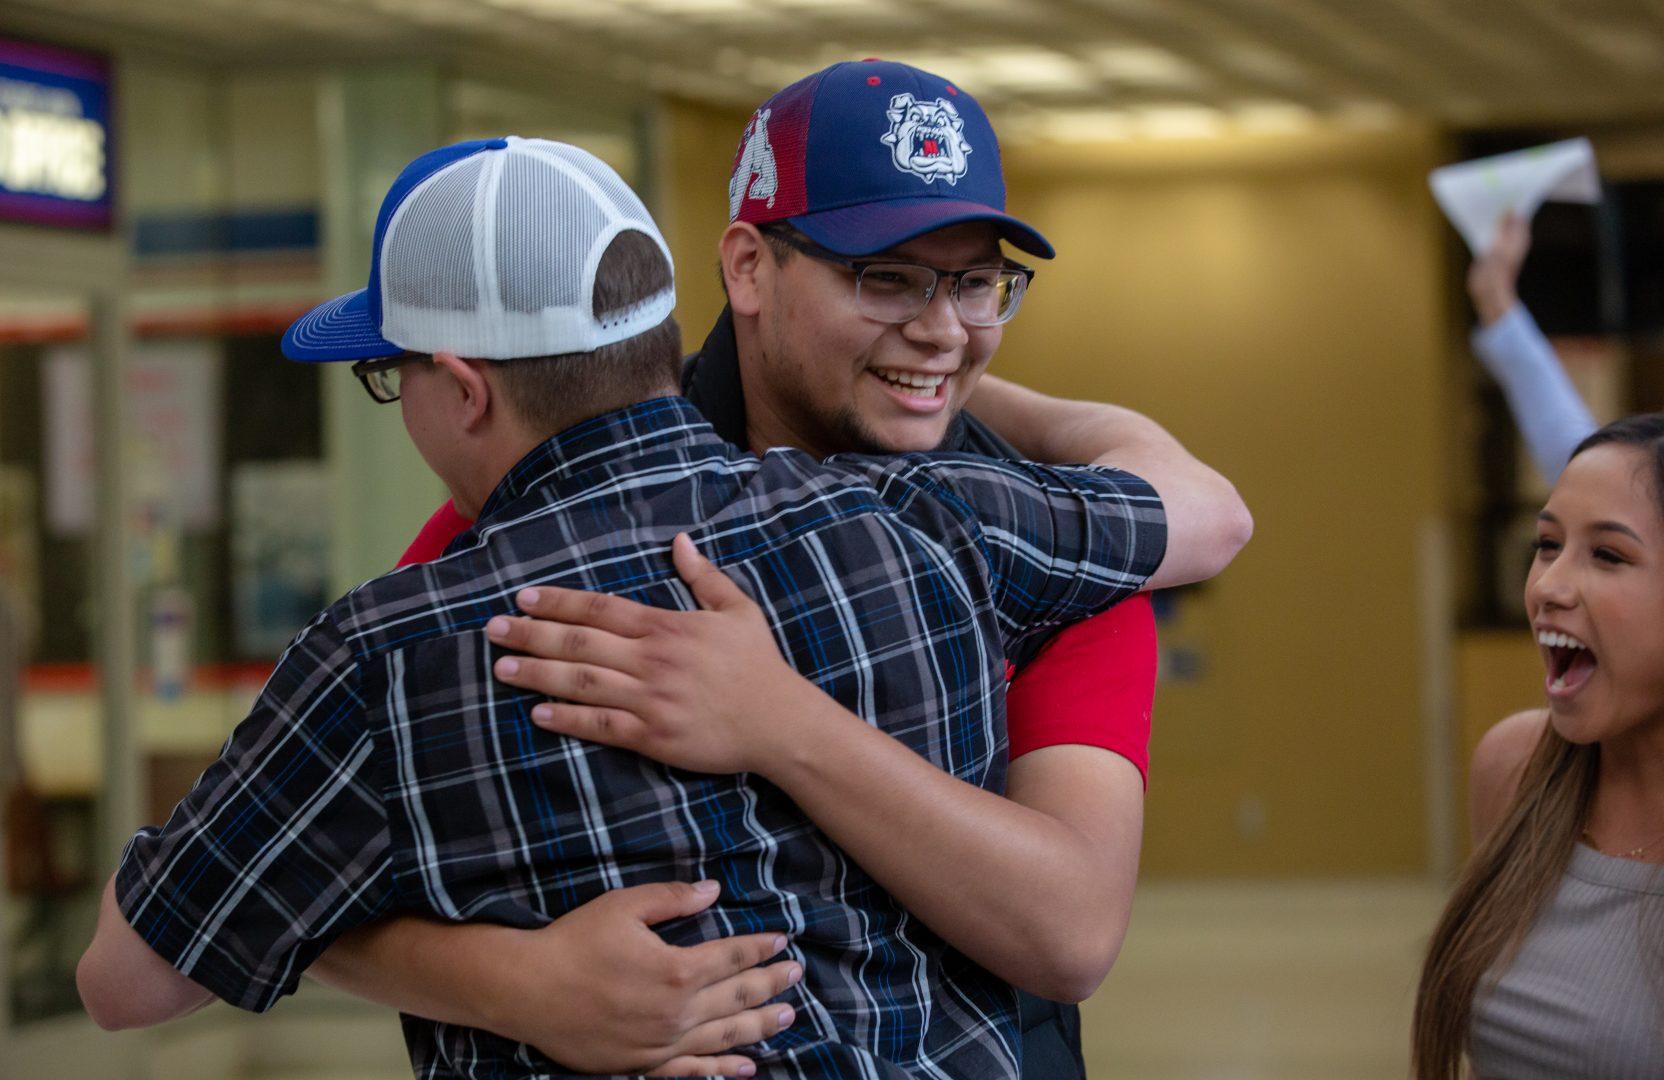 President-elect Omar H. Hernandez celebrates with a fellow student as he is announced the winner of the ASI presidential election. (Jose Romo Jr.)